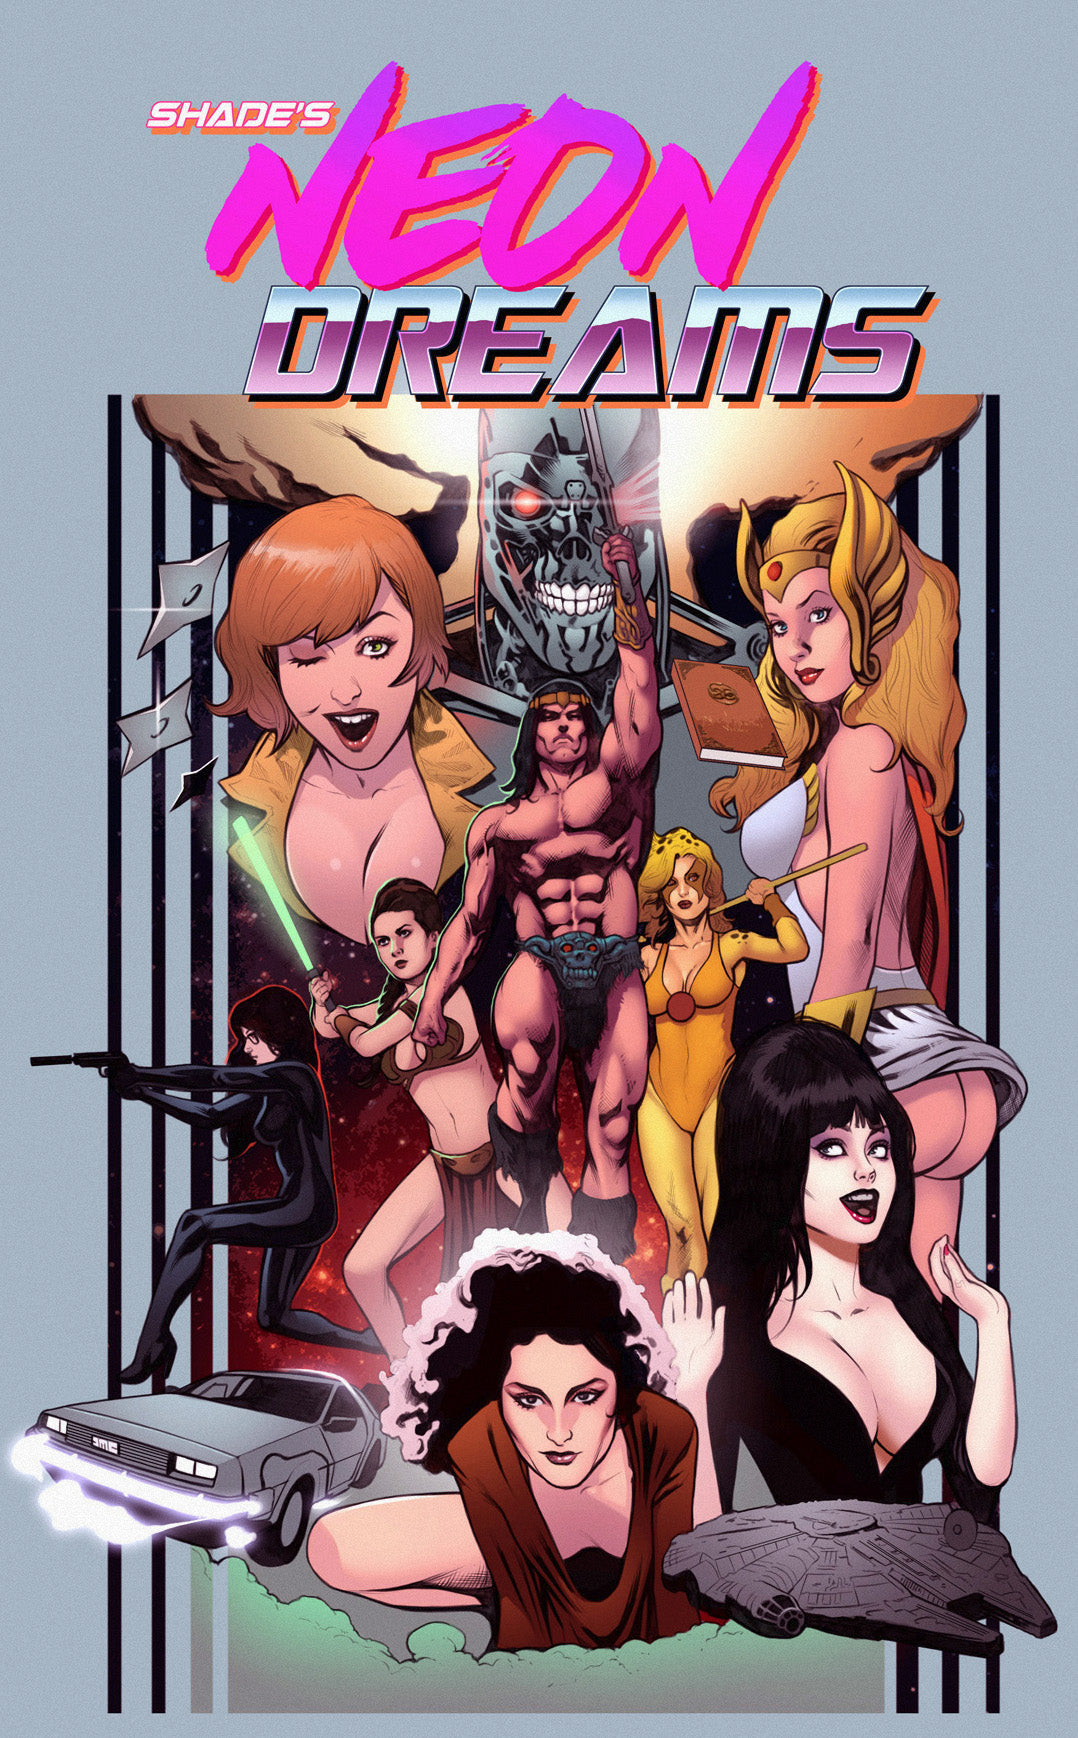 Shade's Neon Dreams - 80s Adult Graphic Novel PDF